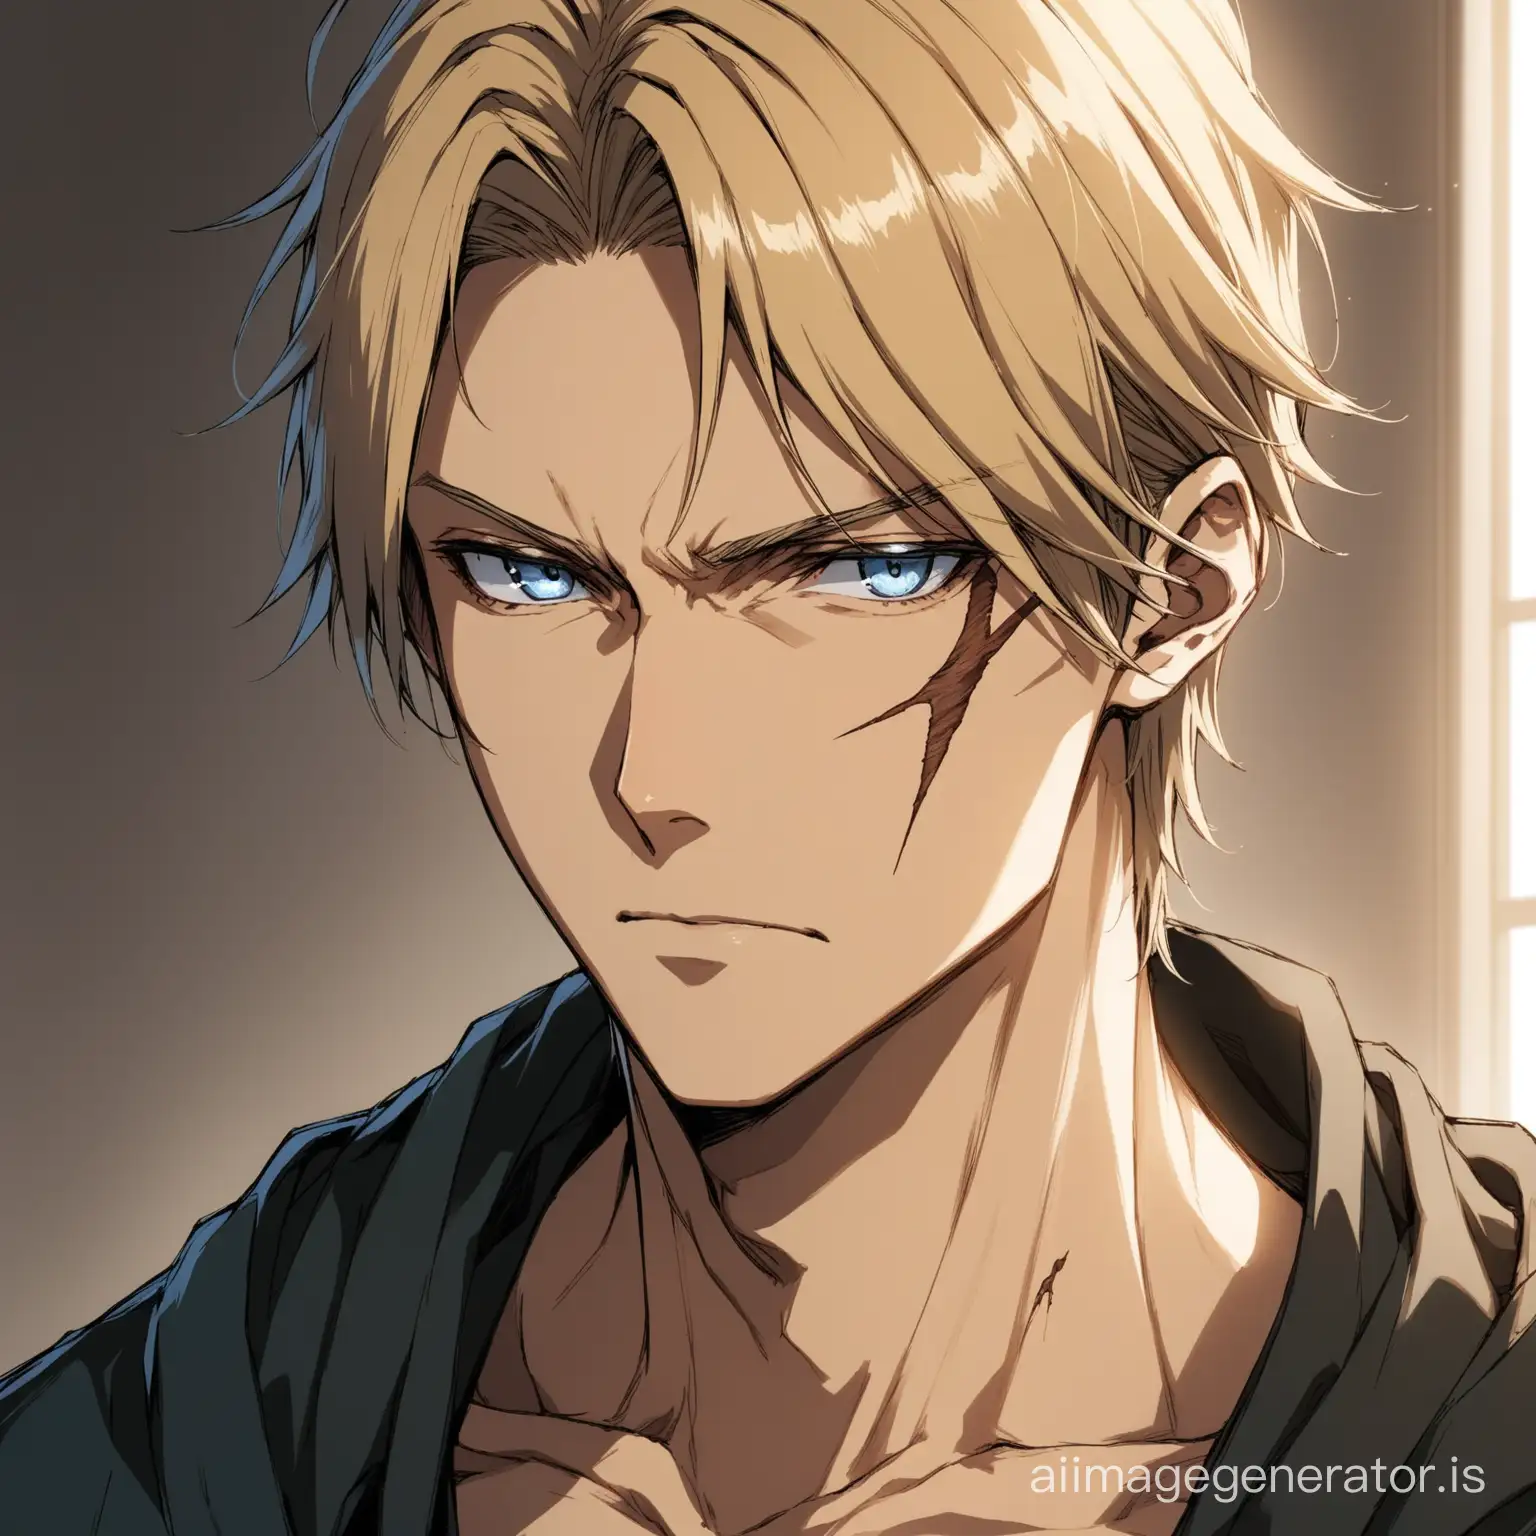 Russian-Anime-Man-Unloading-in-Black-with-Prominent-Cheekbones-and-GreyBlue-Eyes